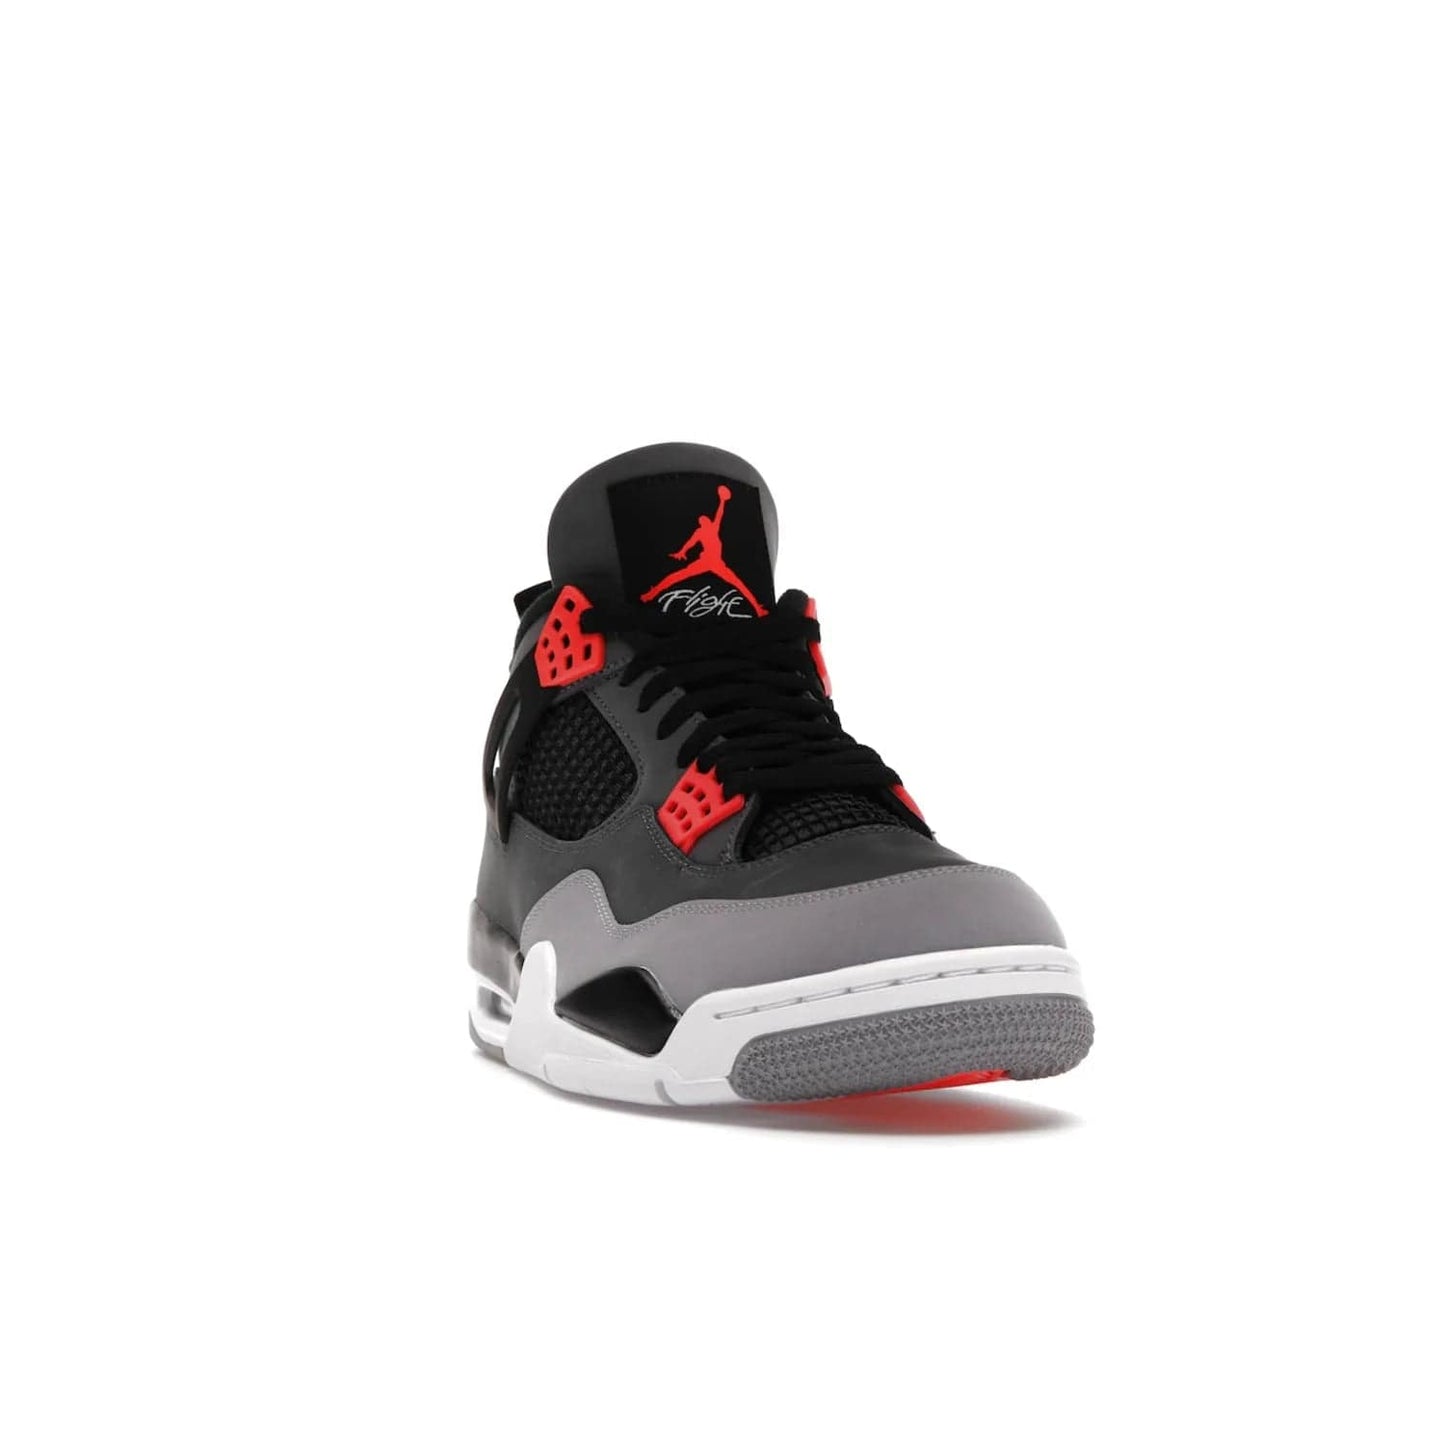 Jordan 4 Retro Infrared - Image 8 - Only at www.BallersClubKickz.com - Introducing the classic & timeless Air Jordan 4 Infrared. Durabuck upper, TPU mesh inserts, tech straps & heel tabs in dark grey and infrared accents. White sole with visible Air units. Out June 15, 2022. Get your pair now!